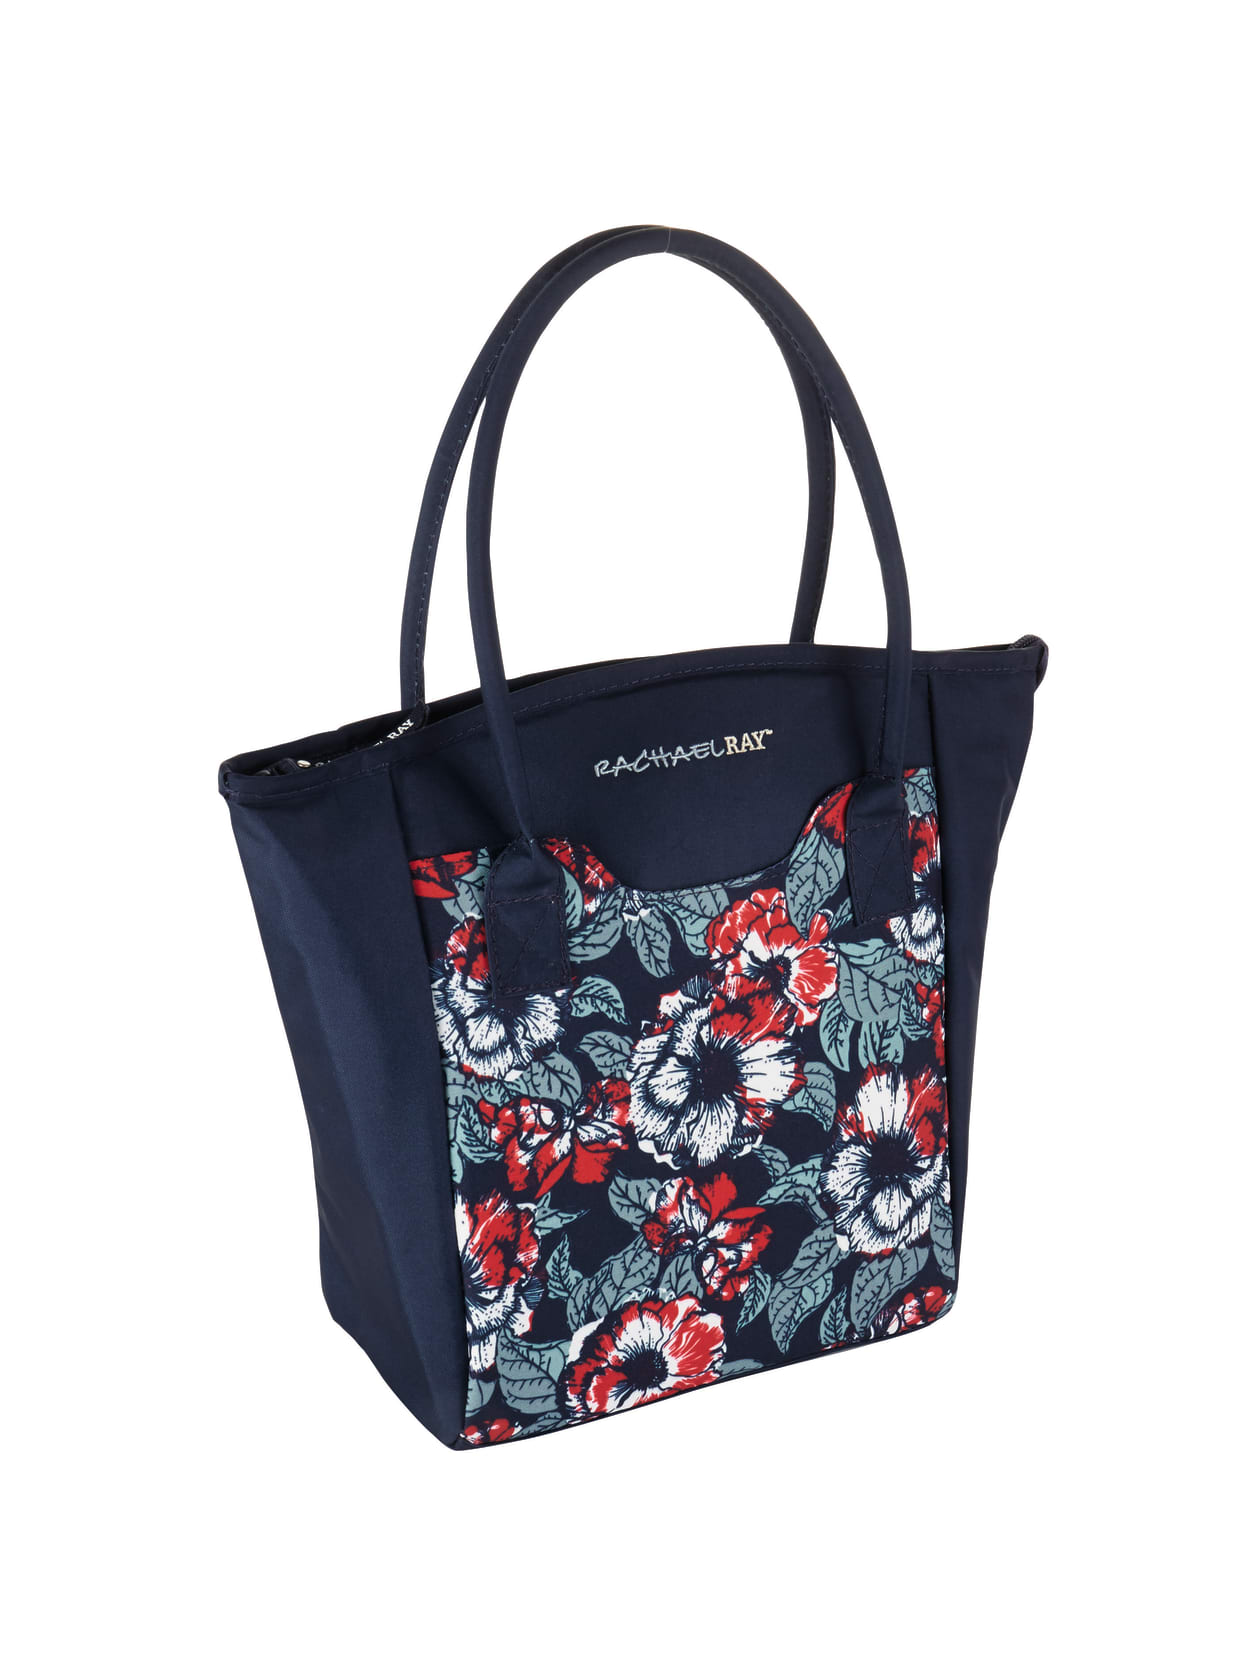 Rachael Ray Milan Insulated Lunch Tote 